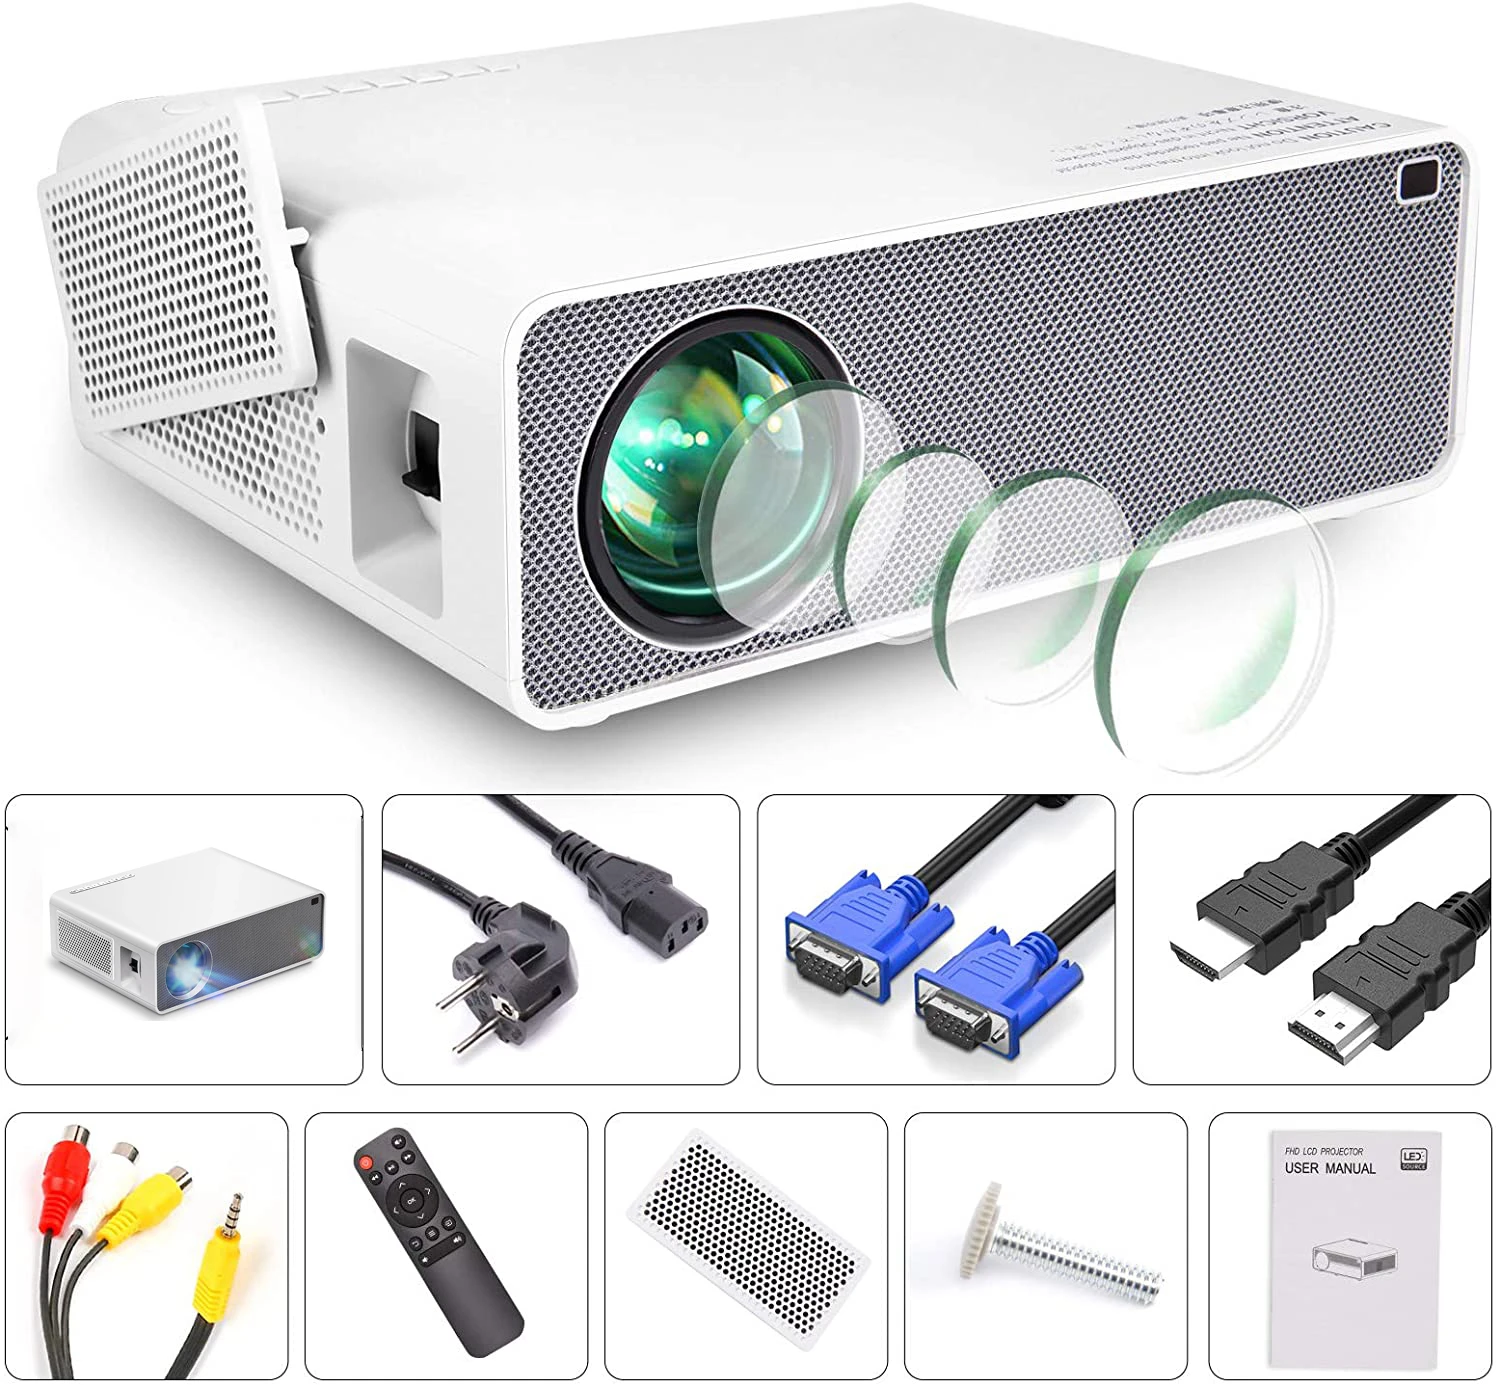 [Factory OEM NEW 1080P Projector ] Aliexpress Hot Native Full HD LED LCD Home Theater Video Projector Cinema